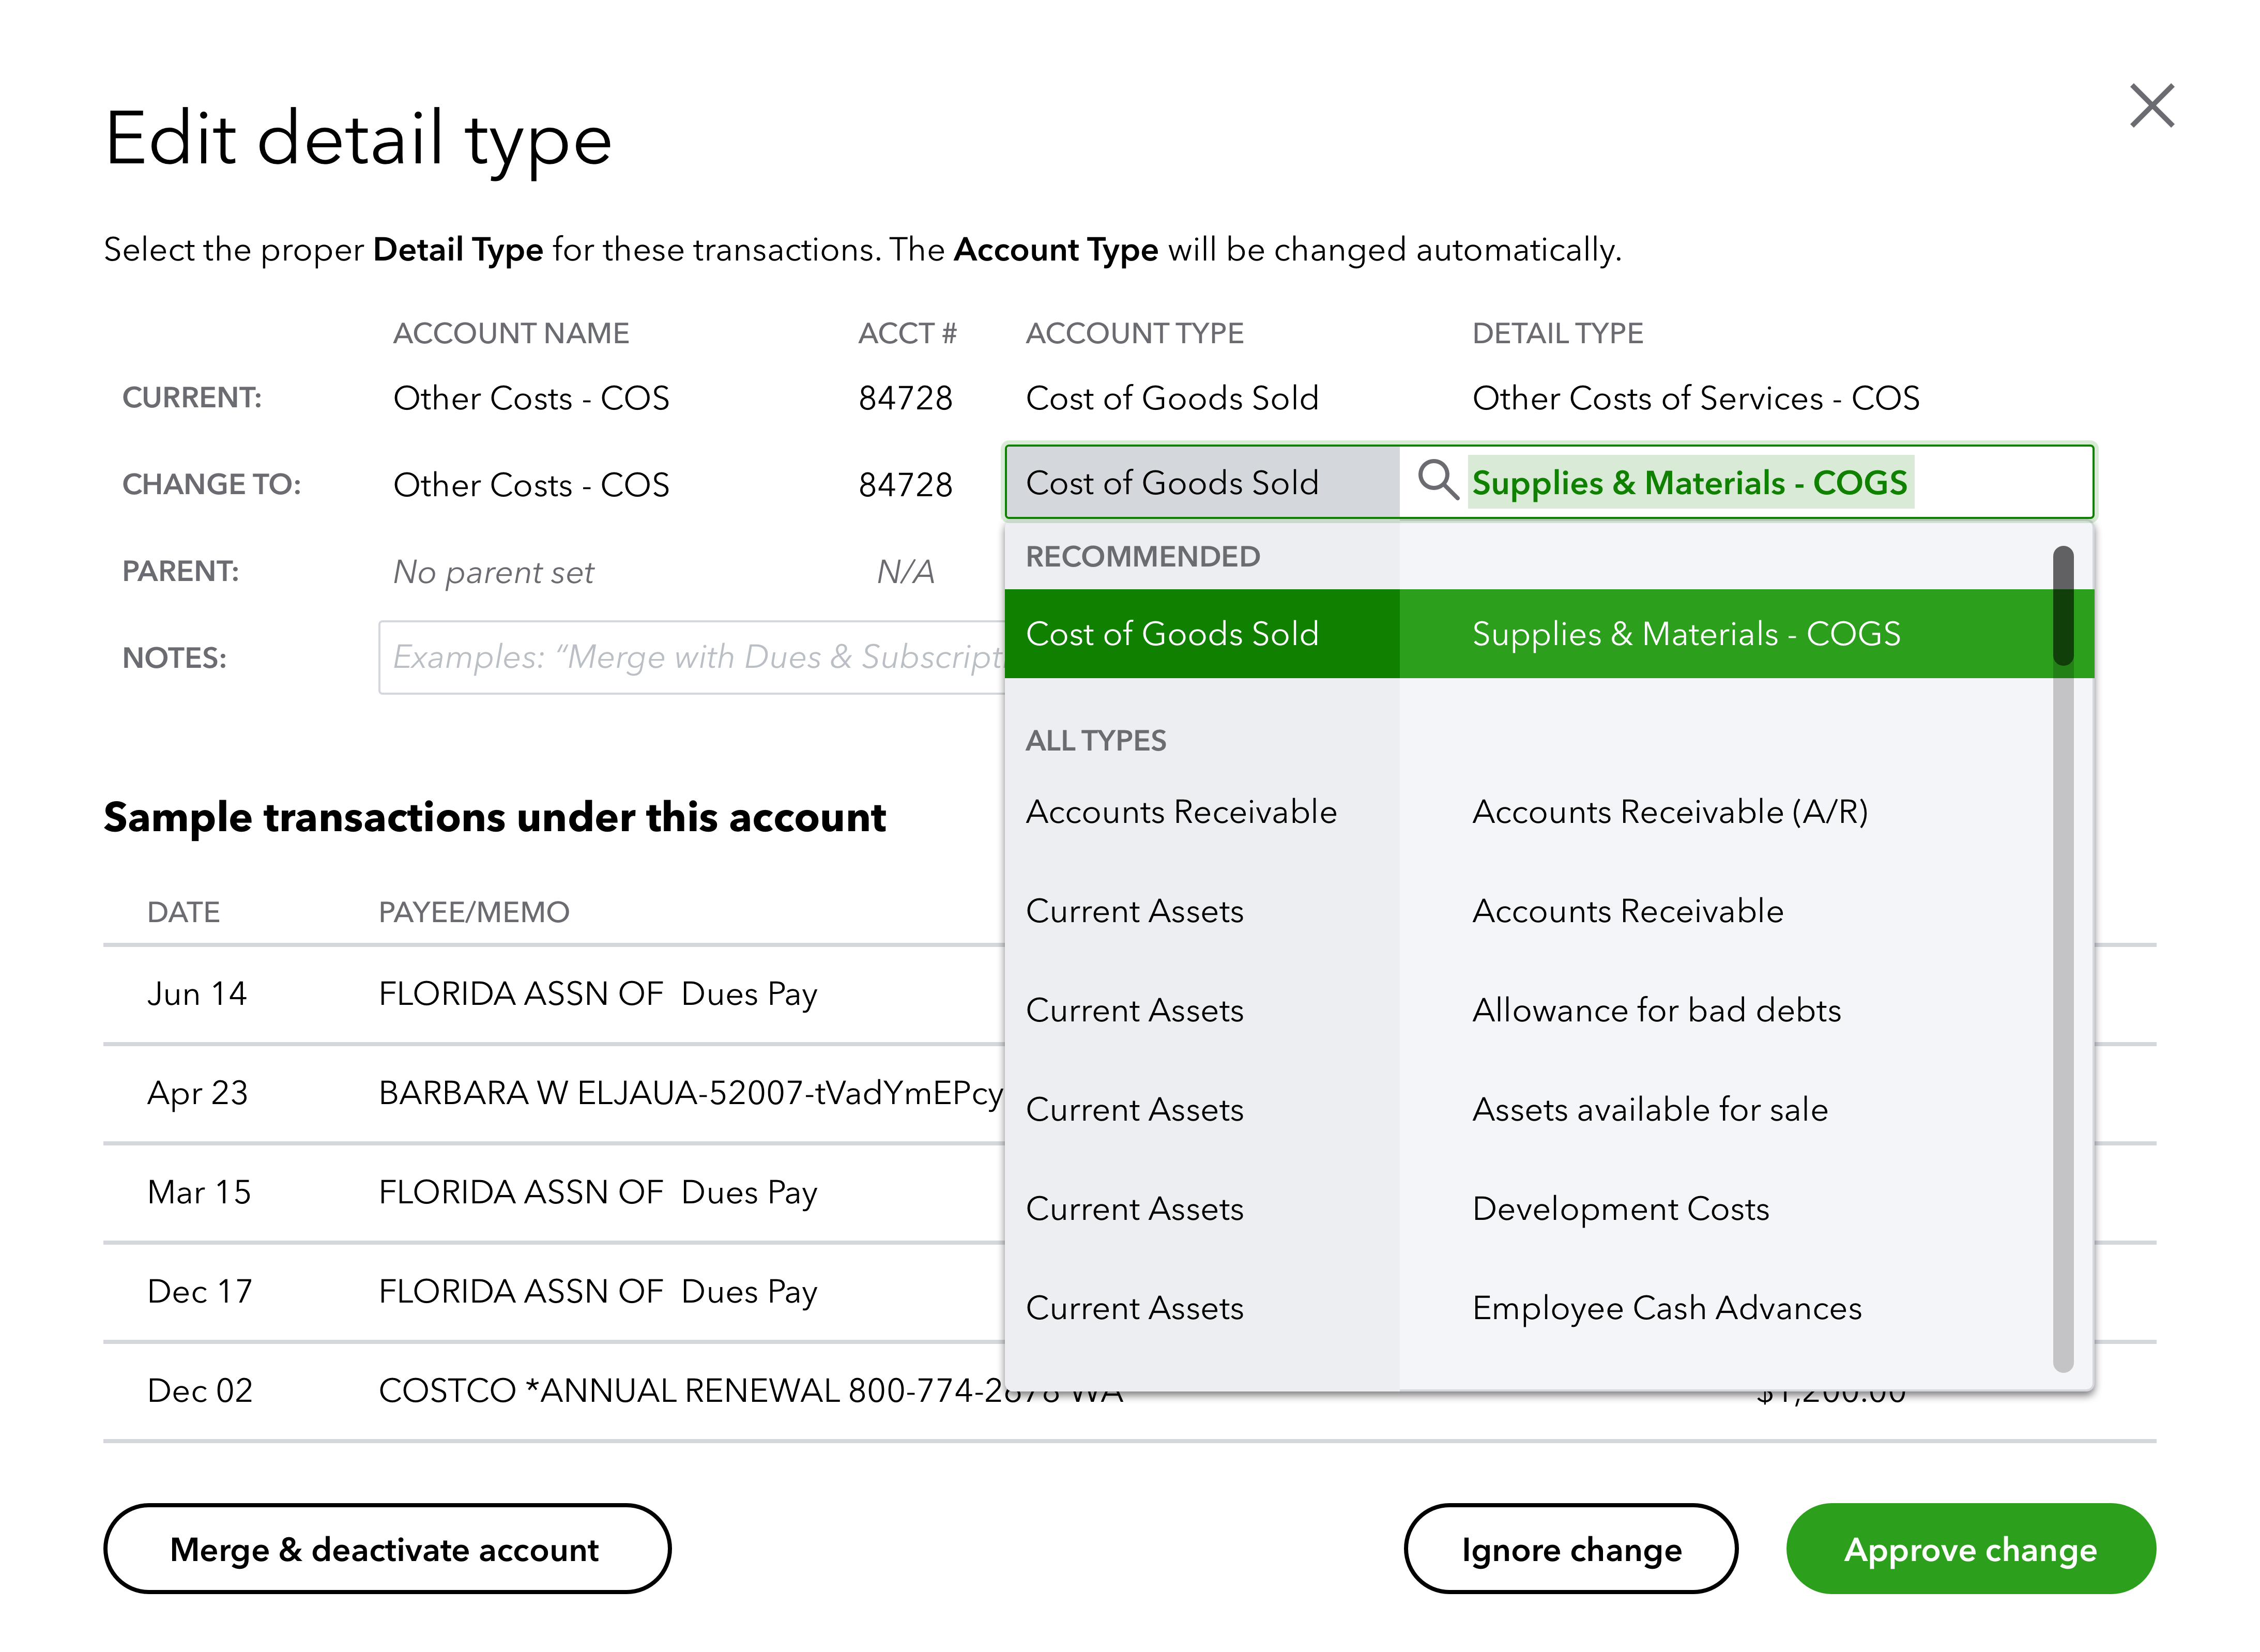 A modal dialog showing the transactions in the account, alongside recommendations for updating the detail type.